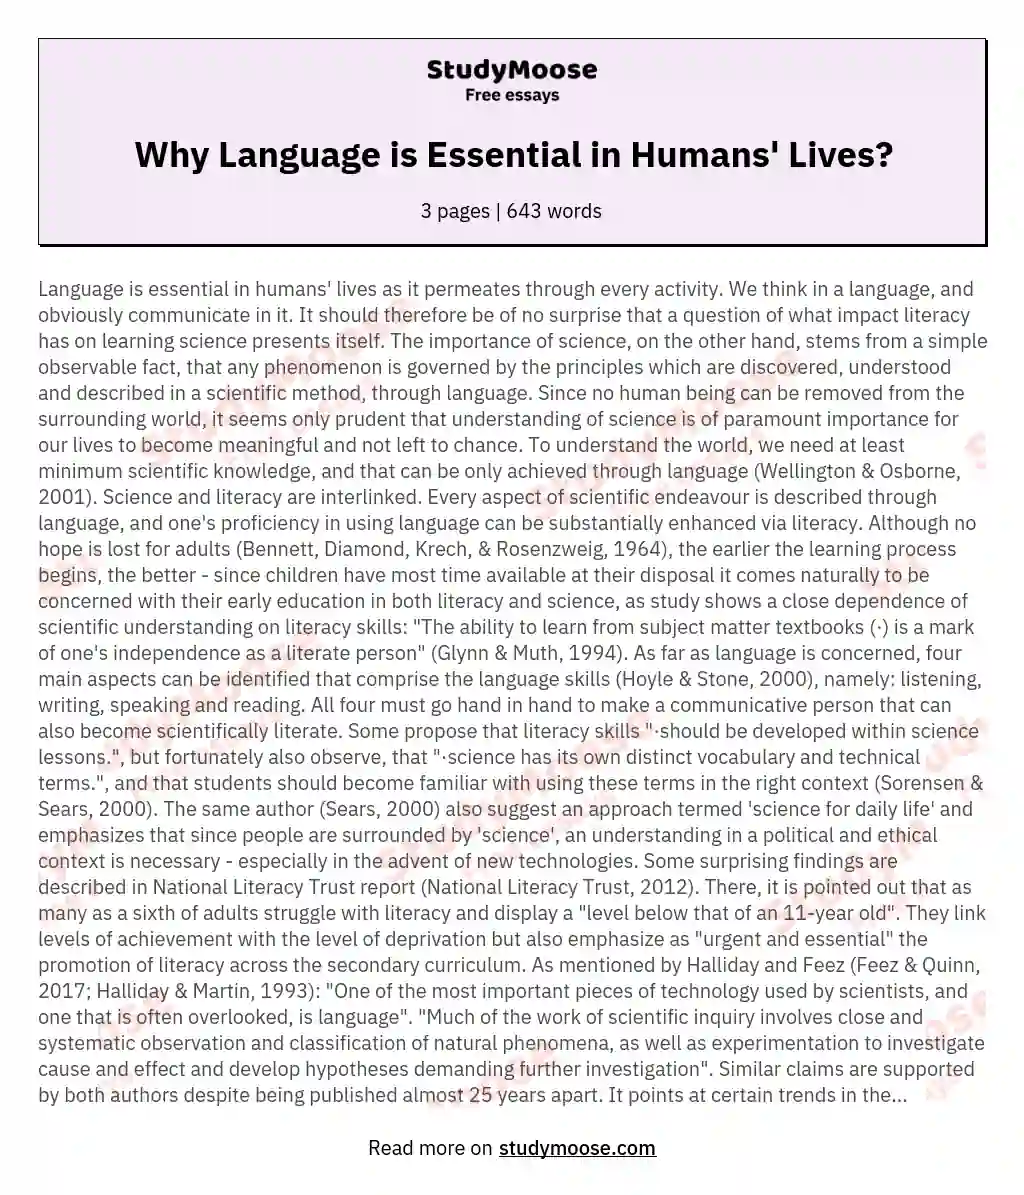 Why Language is Essential in Humans' Lives? essay